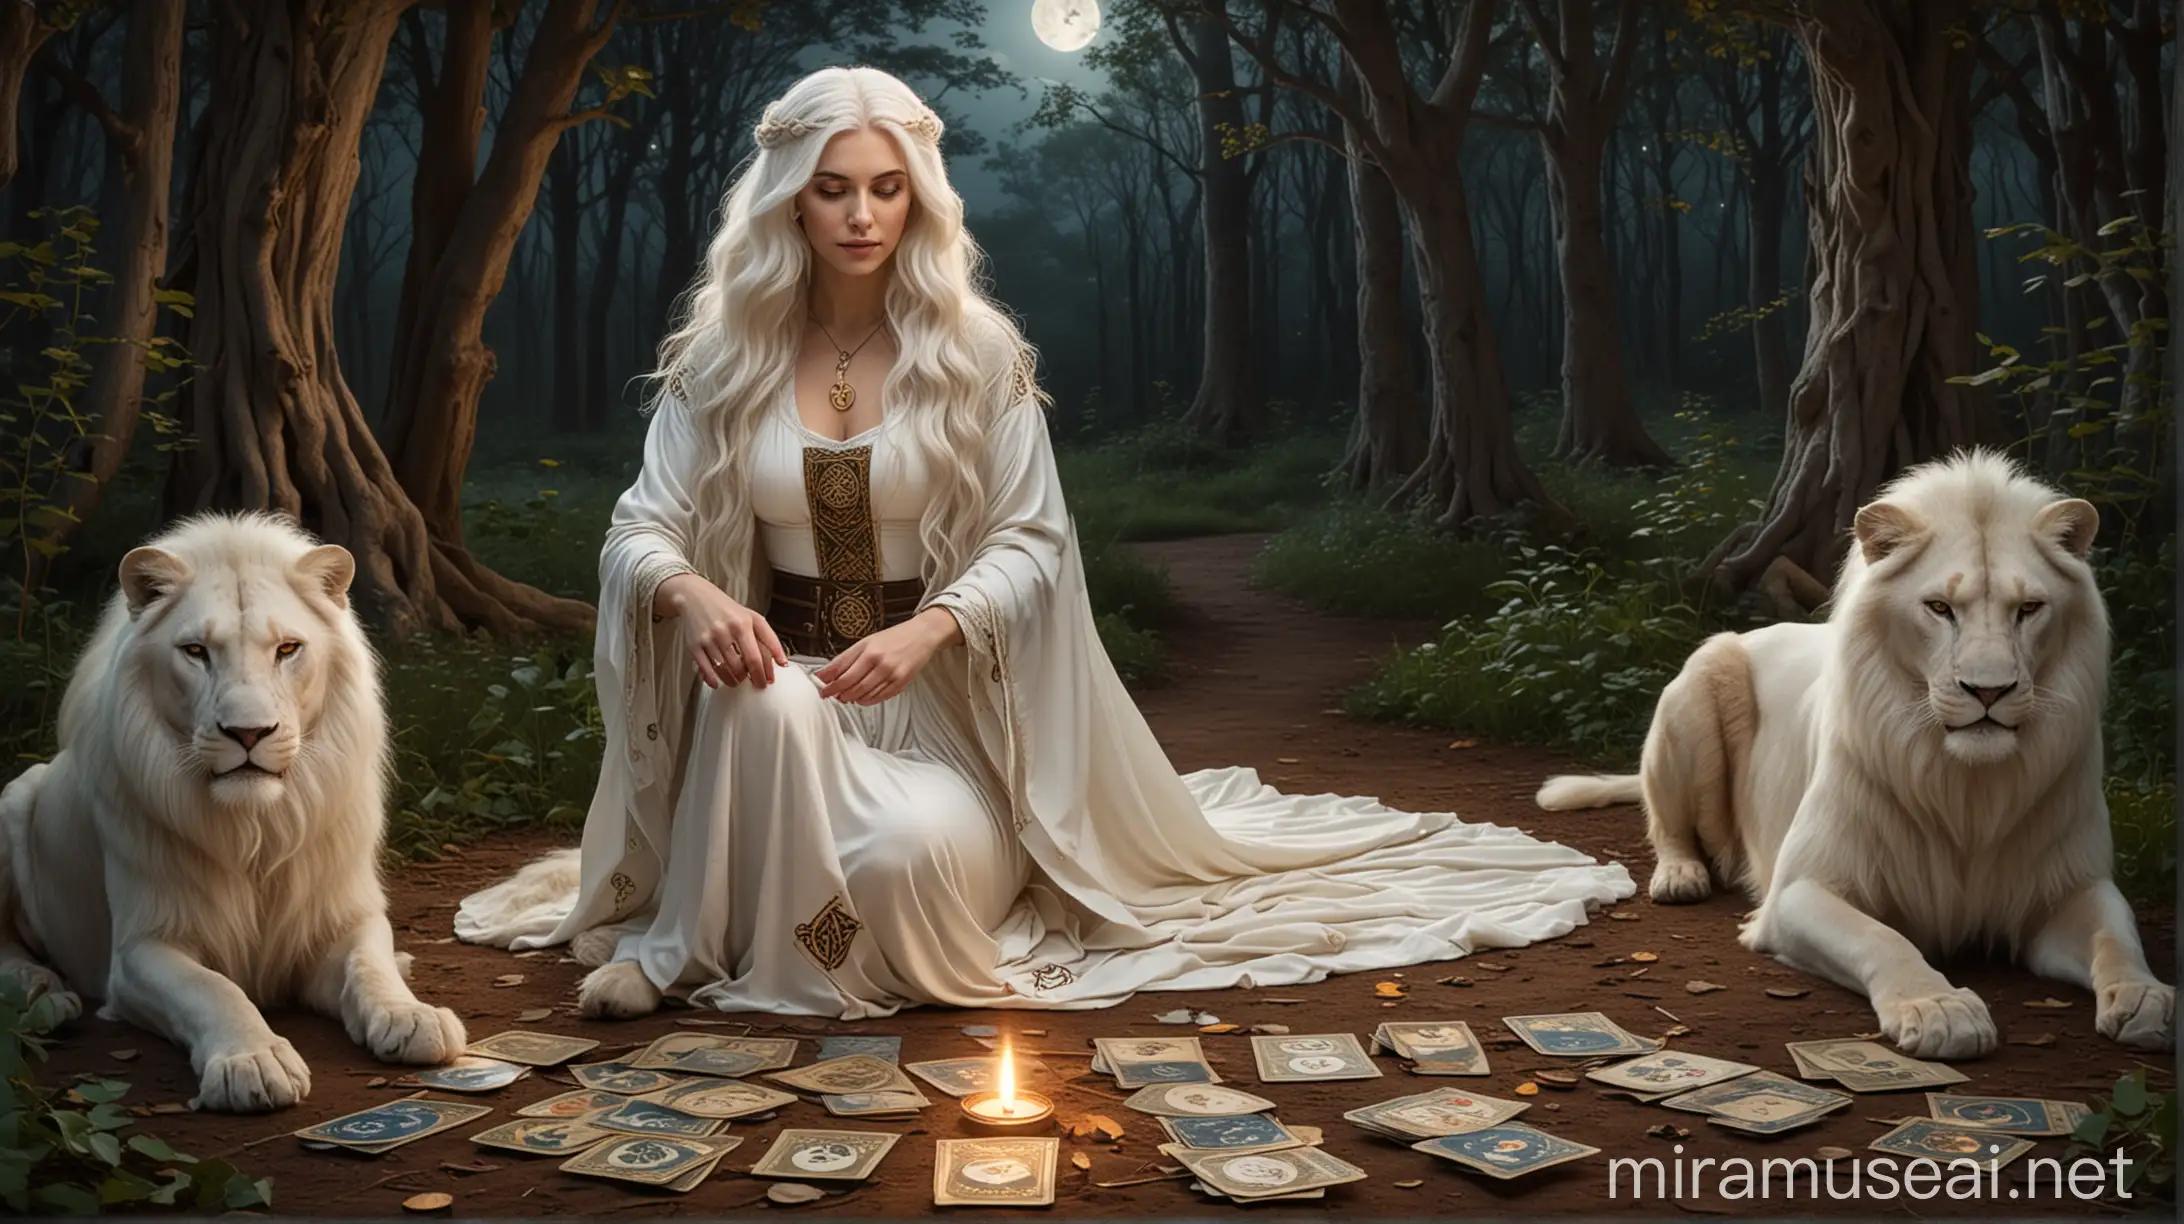 Moonlit Celtic Style Tarot Reading with White Lion Companion